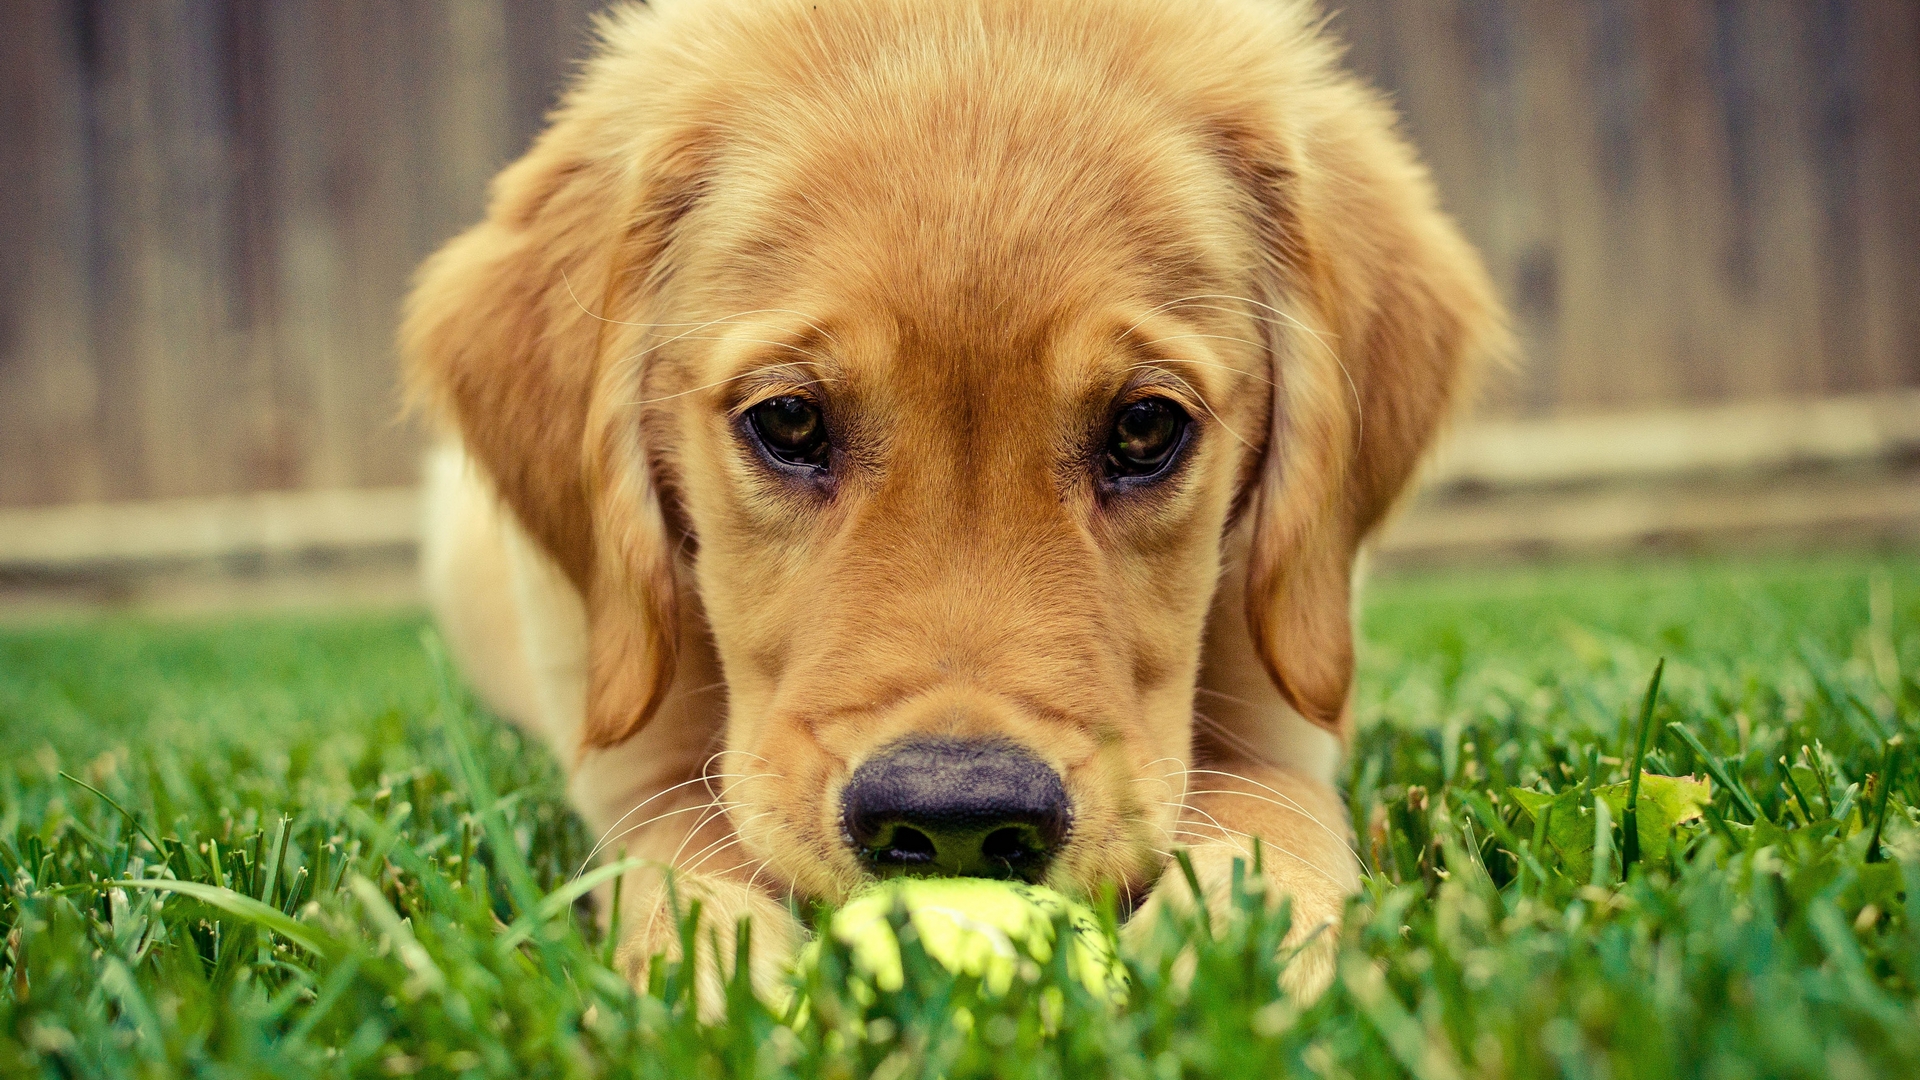 Golden Retriever Wallpapers, Pictures, Images